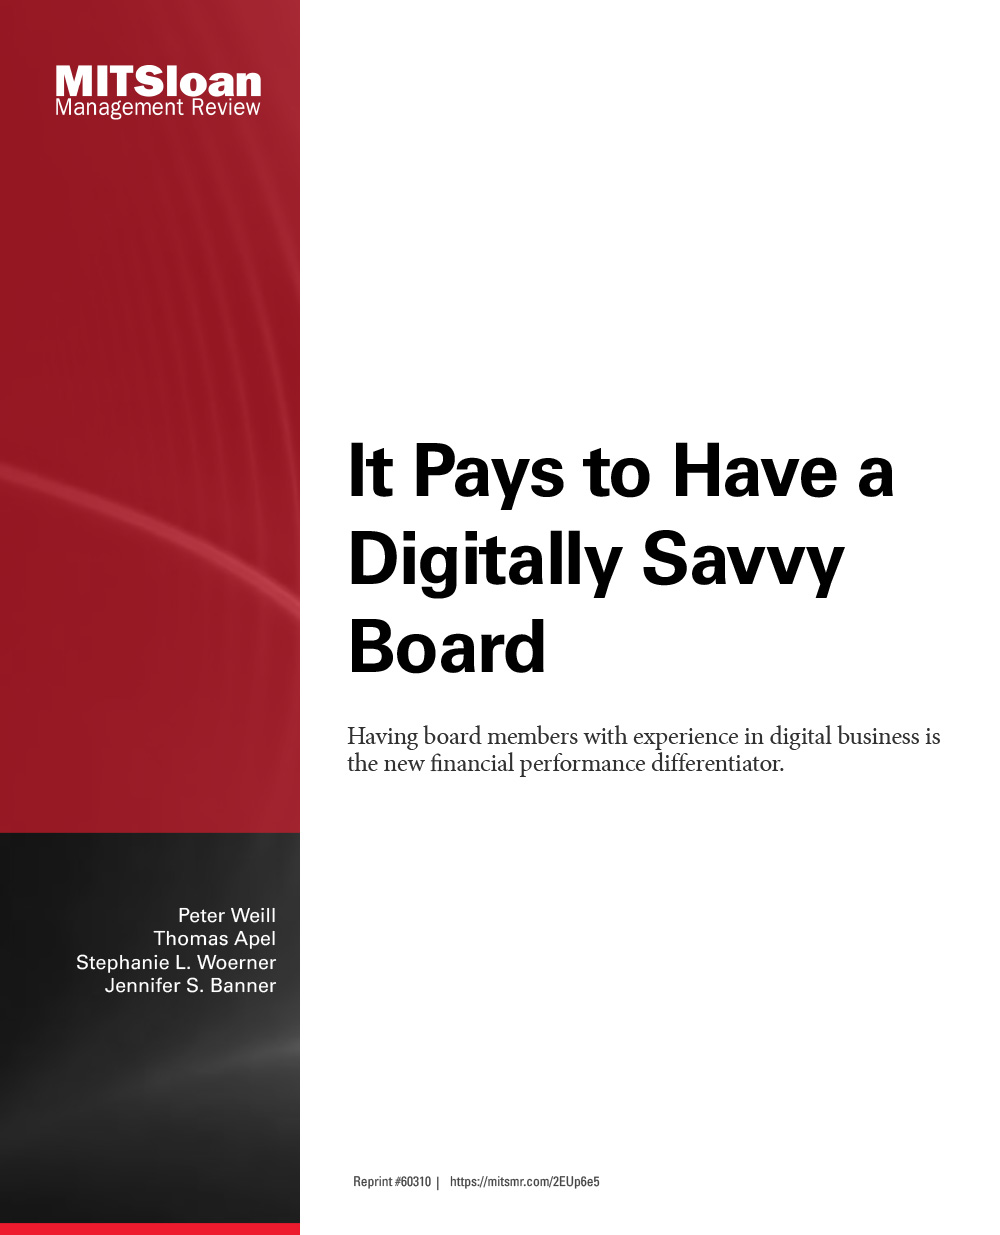 It Pays to have a Digitally Savvy Board